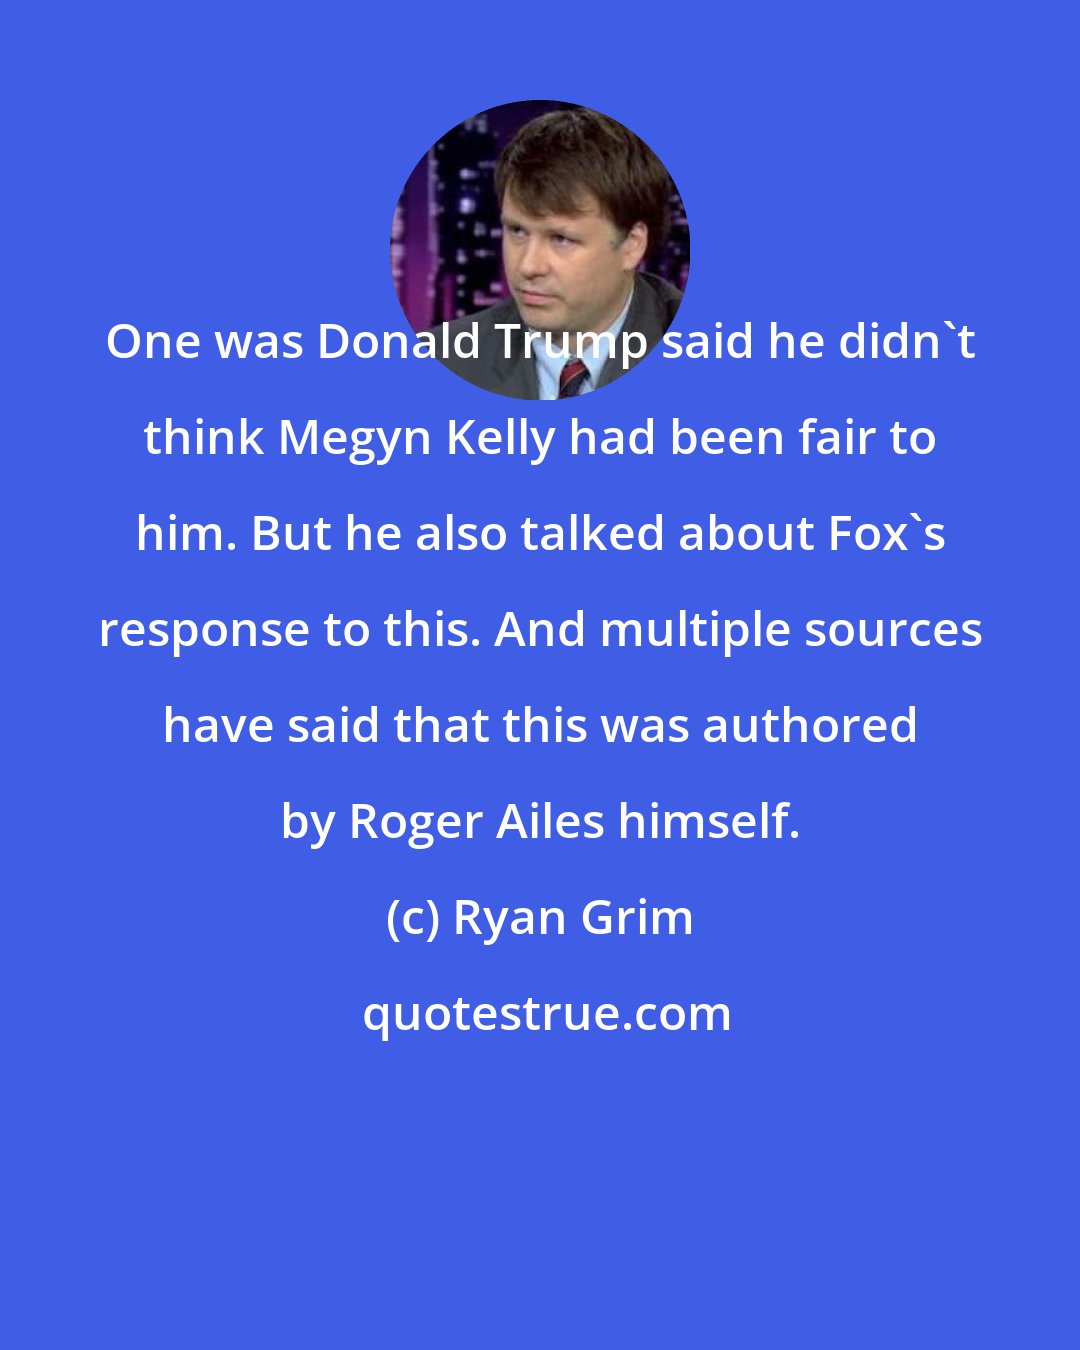 Ryan Grim: One was Donald Trump said he didn't think Megyn Kelly had been fair to him. But he also talked about Fox's response to this. And multiple sources have said that this was authored by Roger Ailes himself.